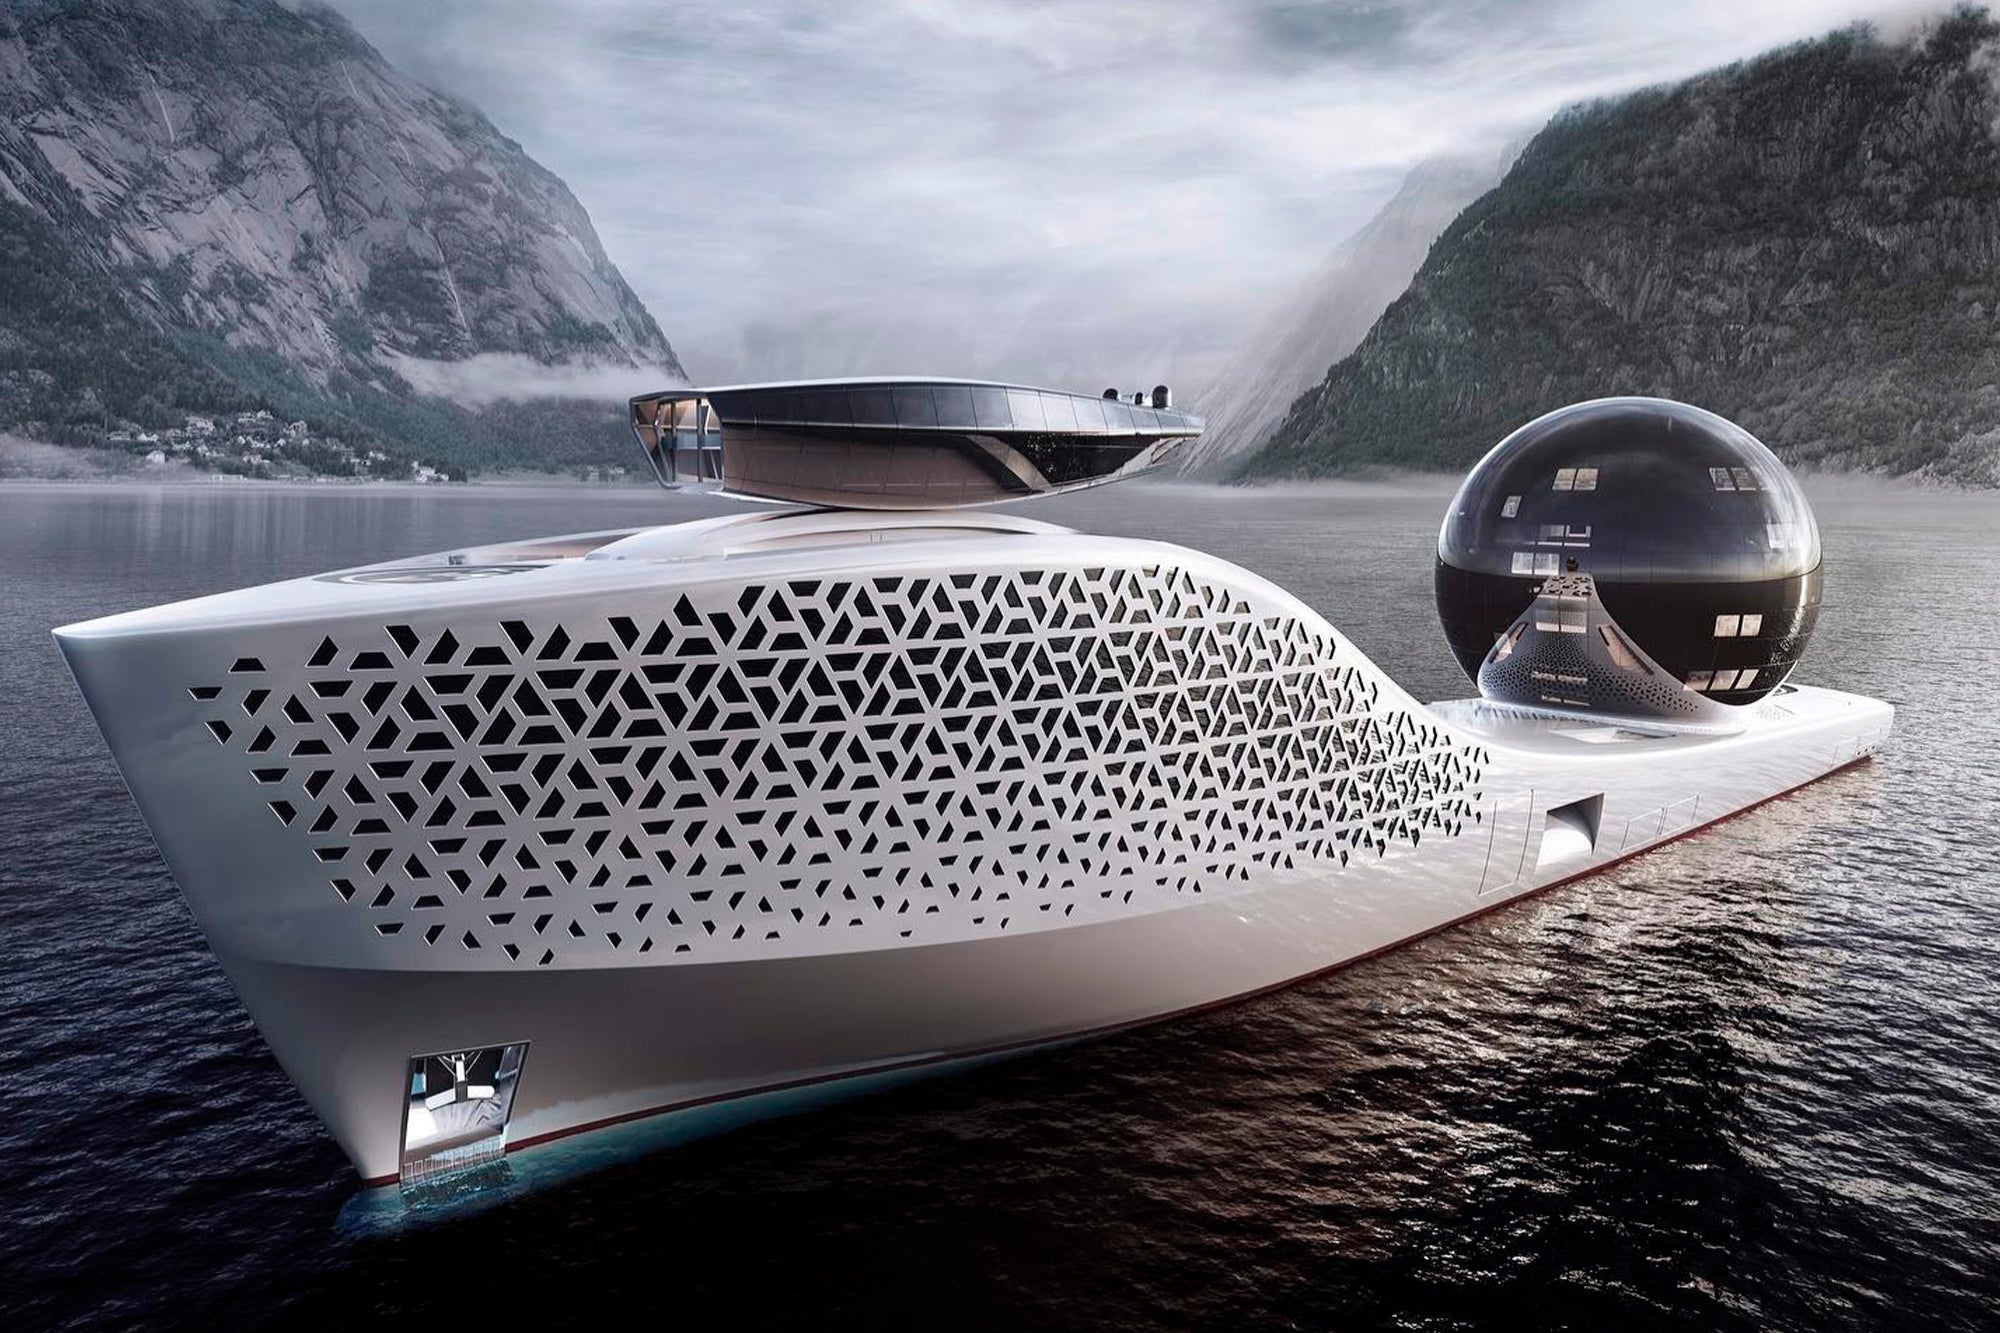 It Costs $3 Million to Travel on This Nuclear Yacht Packed With Millionaires, Scientists and Celebrities